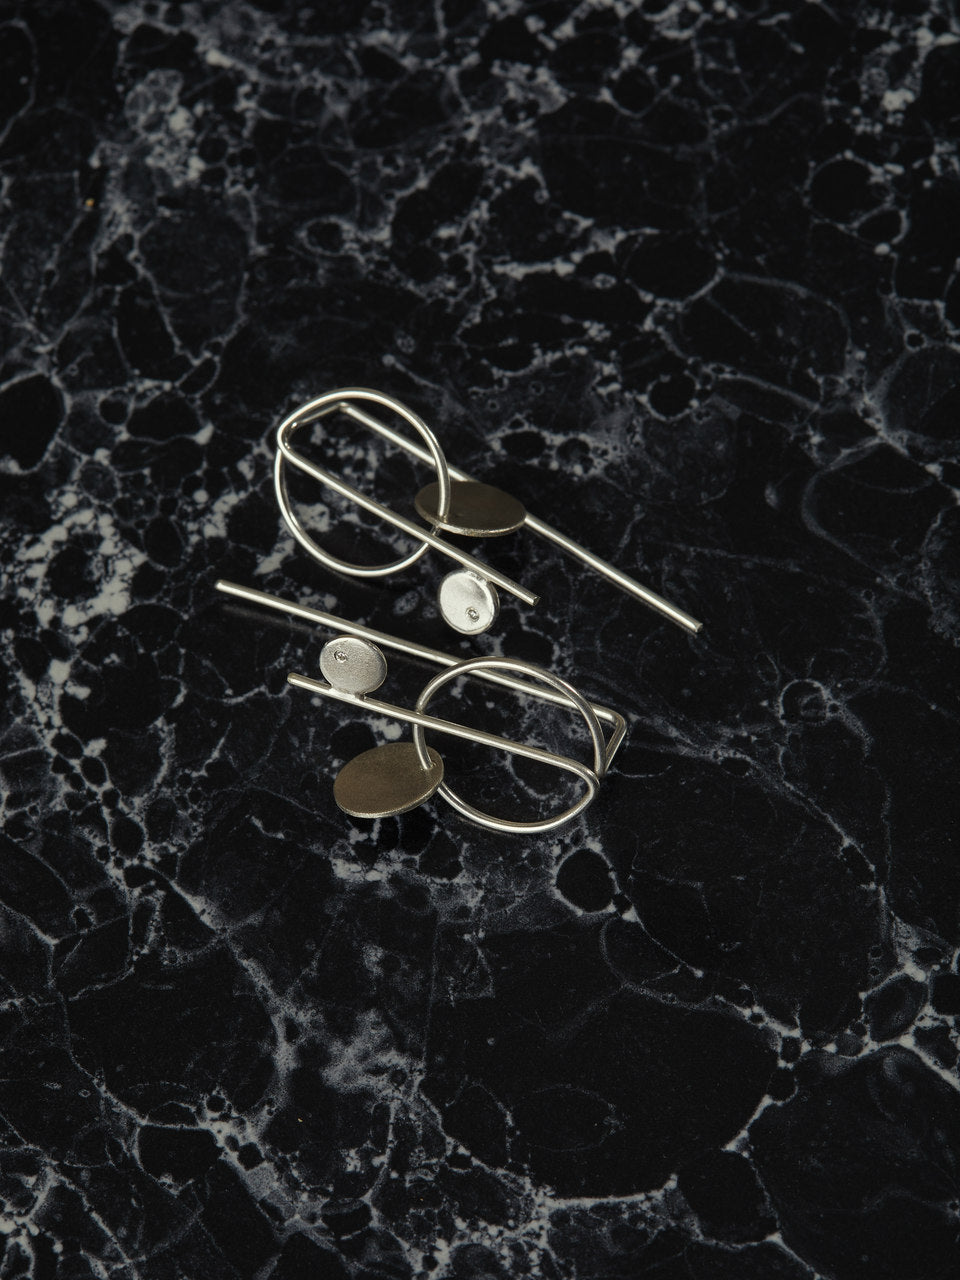 This piece is a result of an amazing collaboration between the ROAD x Contemporia.  Crafted in Sterling Silver, the earrings will uplift any outfit, regardless of your journey. The price includes one piece only.